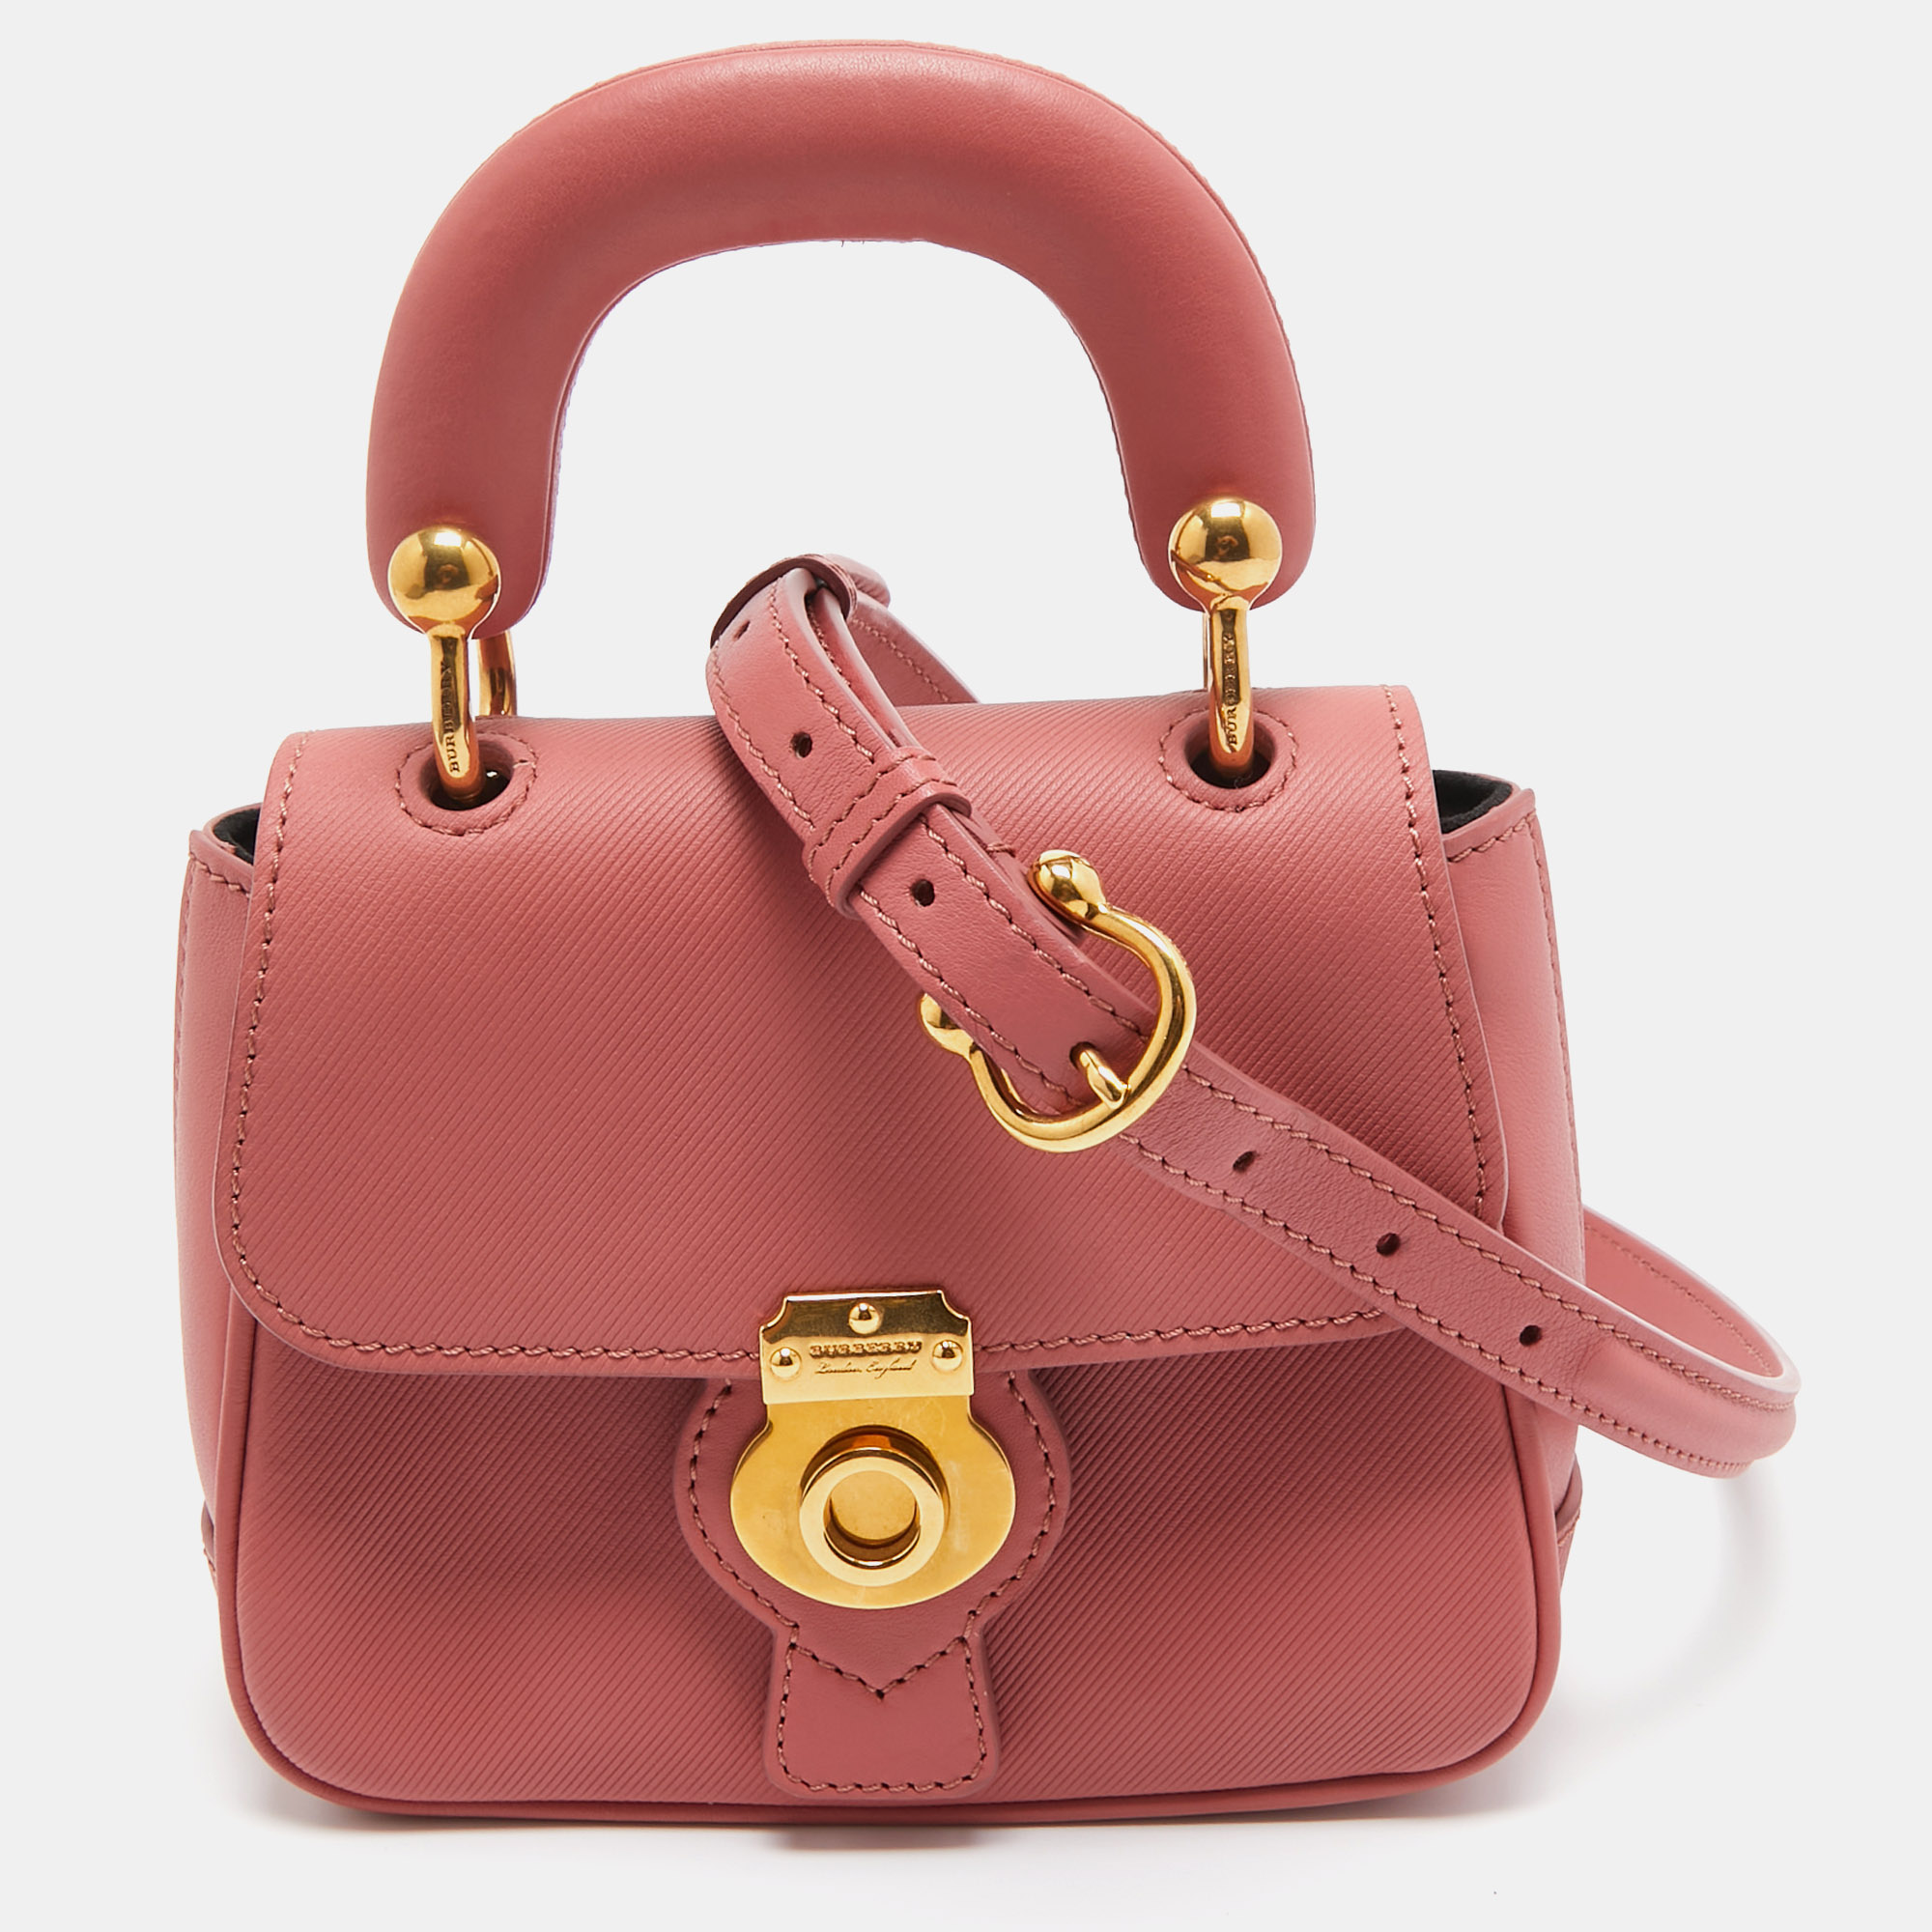 Burberry old rose pink leather mini dk88 top handle bag